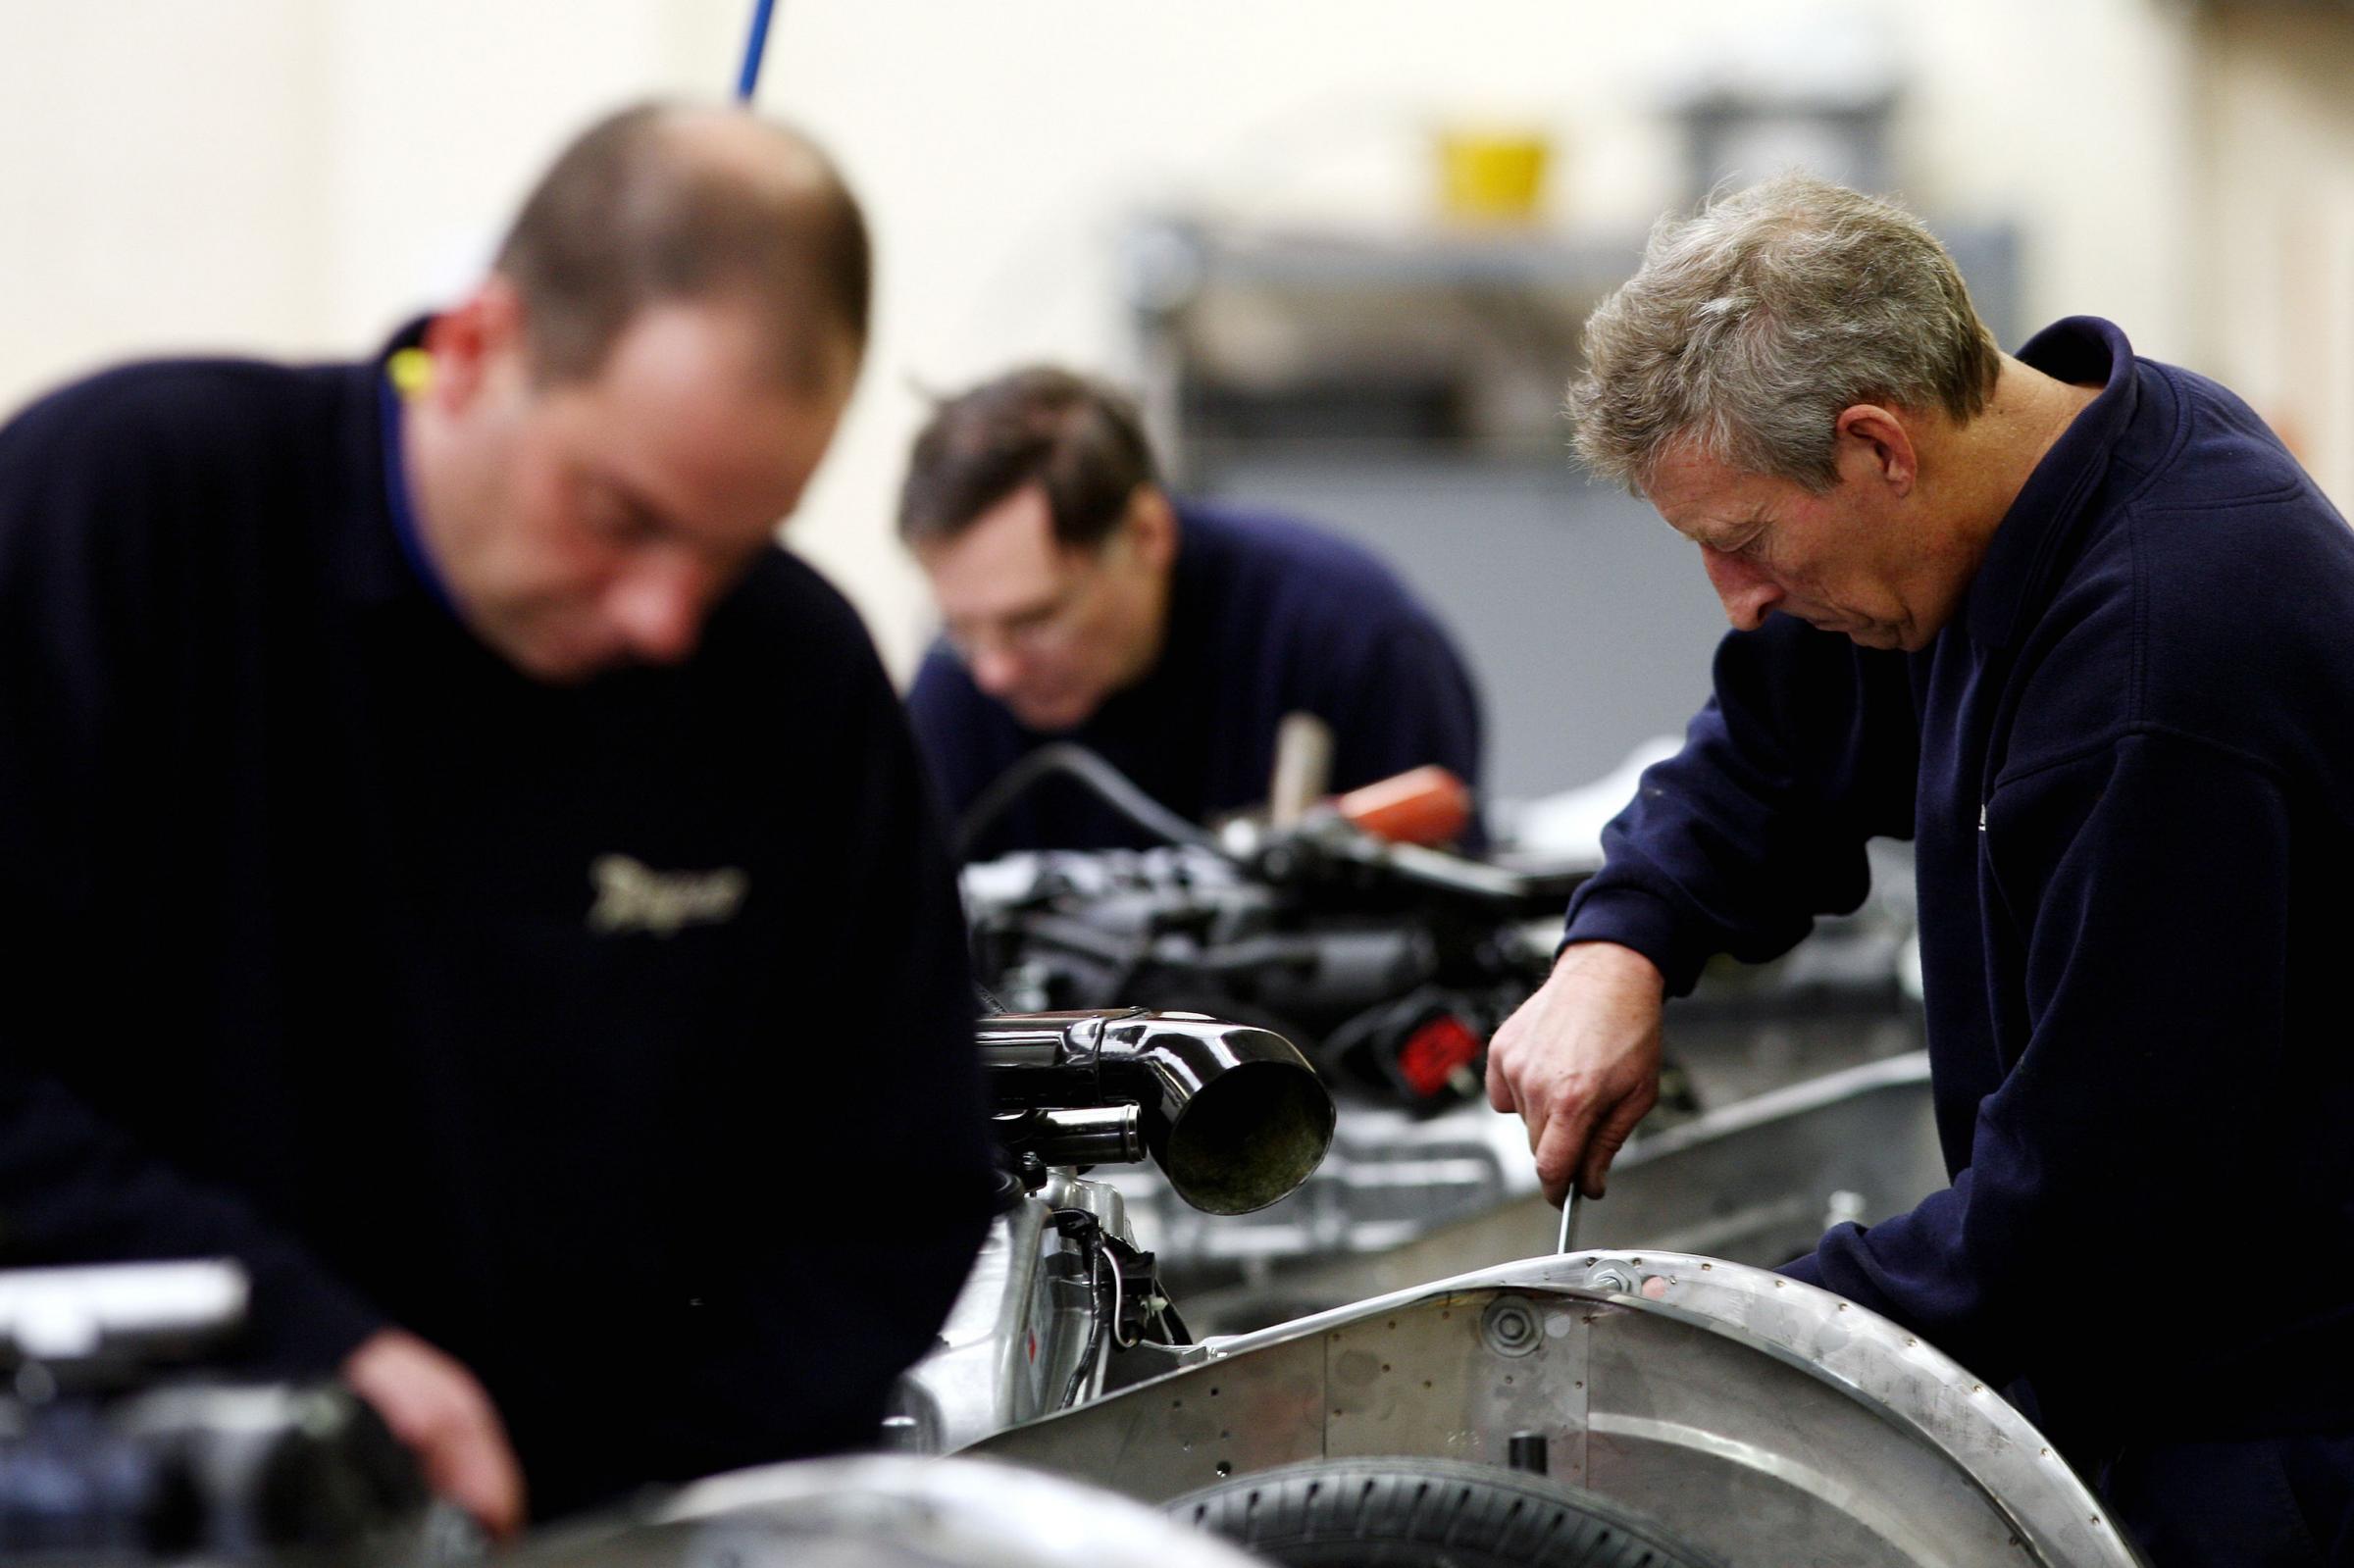 Yorkshire region loses '62,000 manufacturing jobs in 12 years'